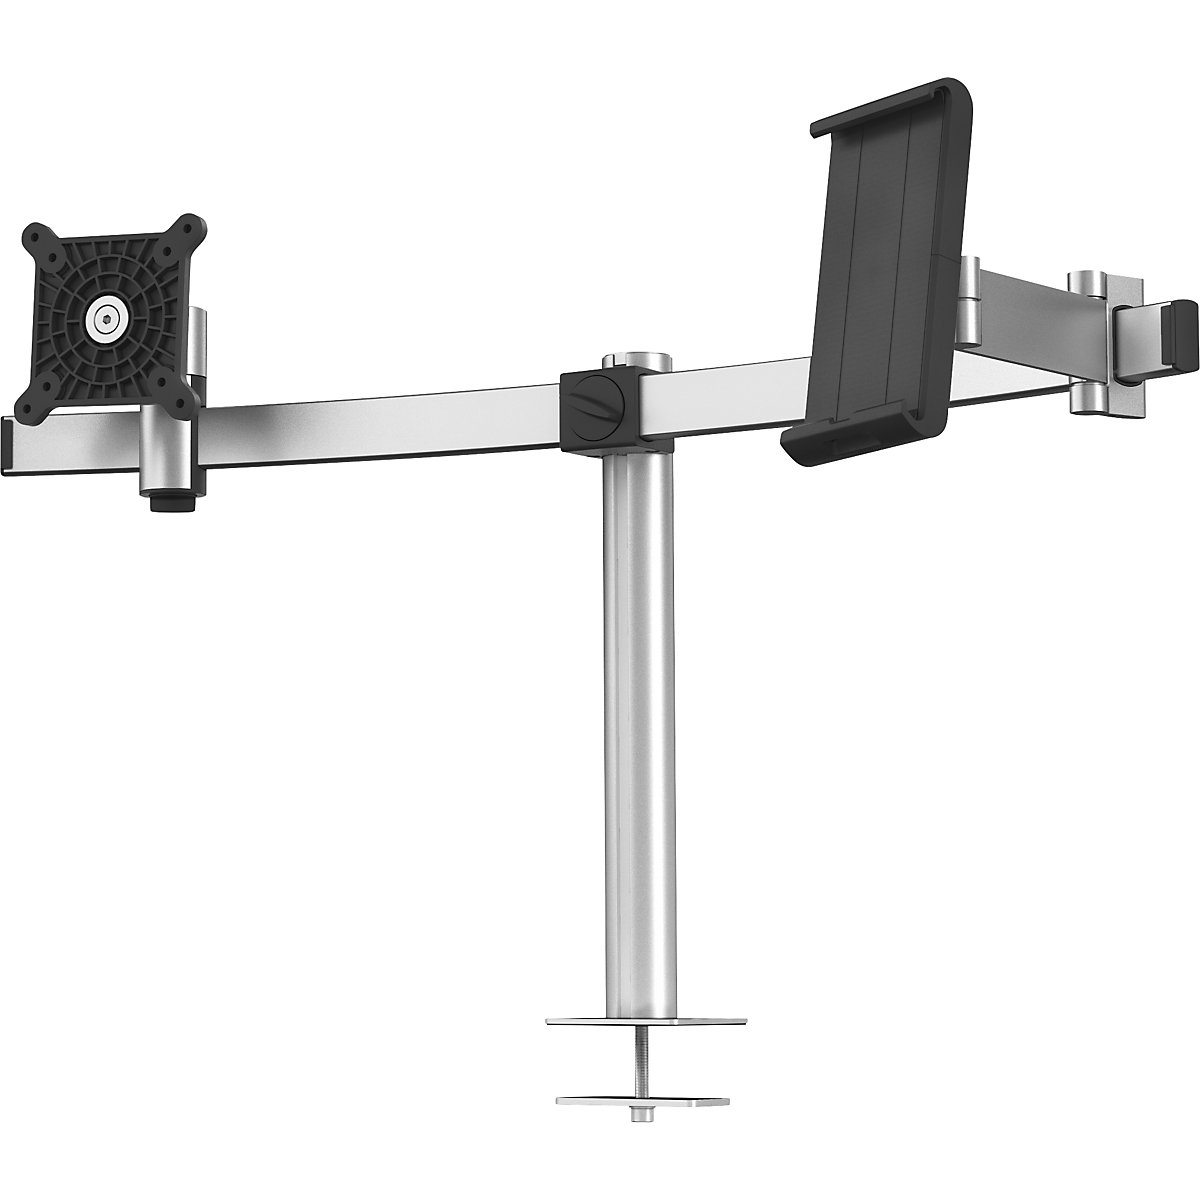 Monitor holder for 1 monitor and 1 tablet – DURABLE, HxWxD 445 x 780 x 190 mm, through-desk mounting